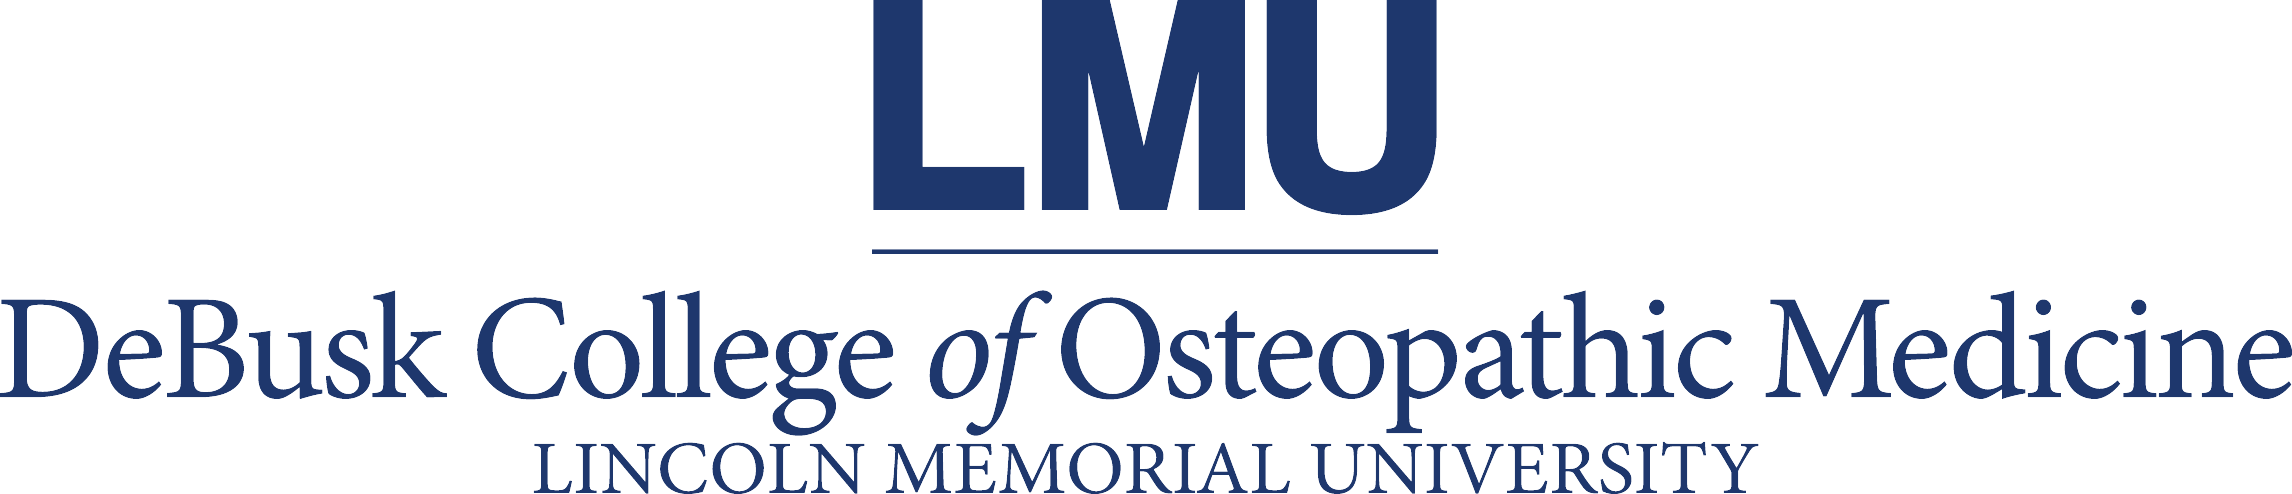 Lincoln Memorial University DeBusk College of Osteopathic Medicine 